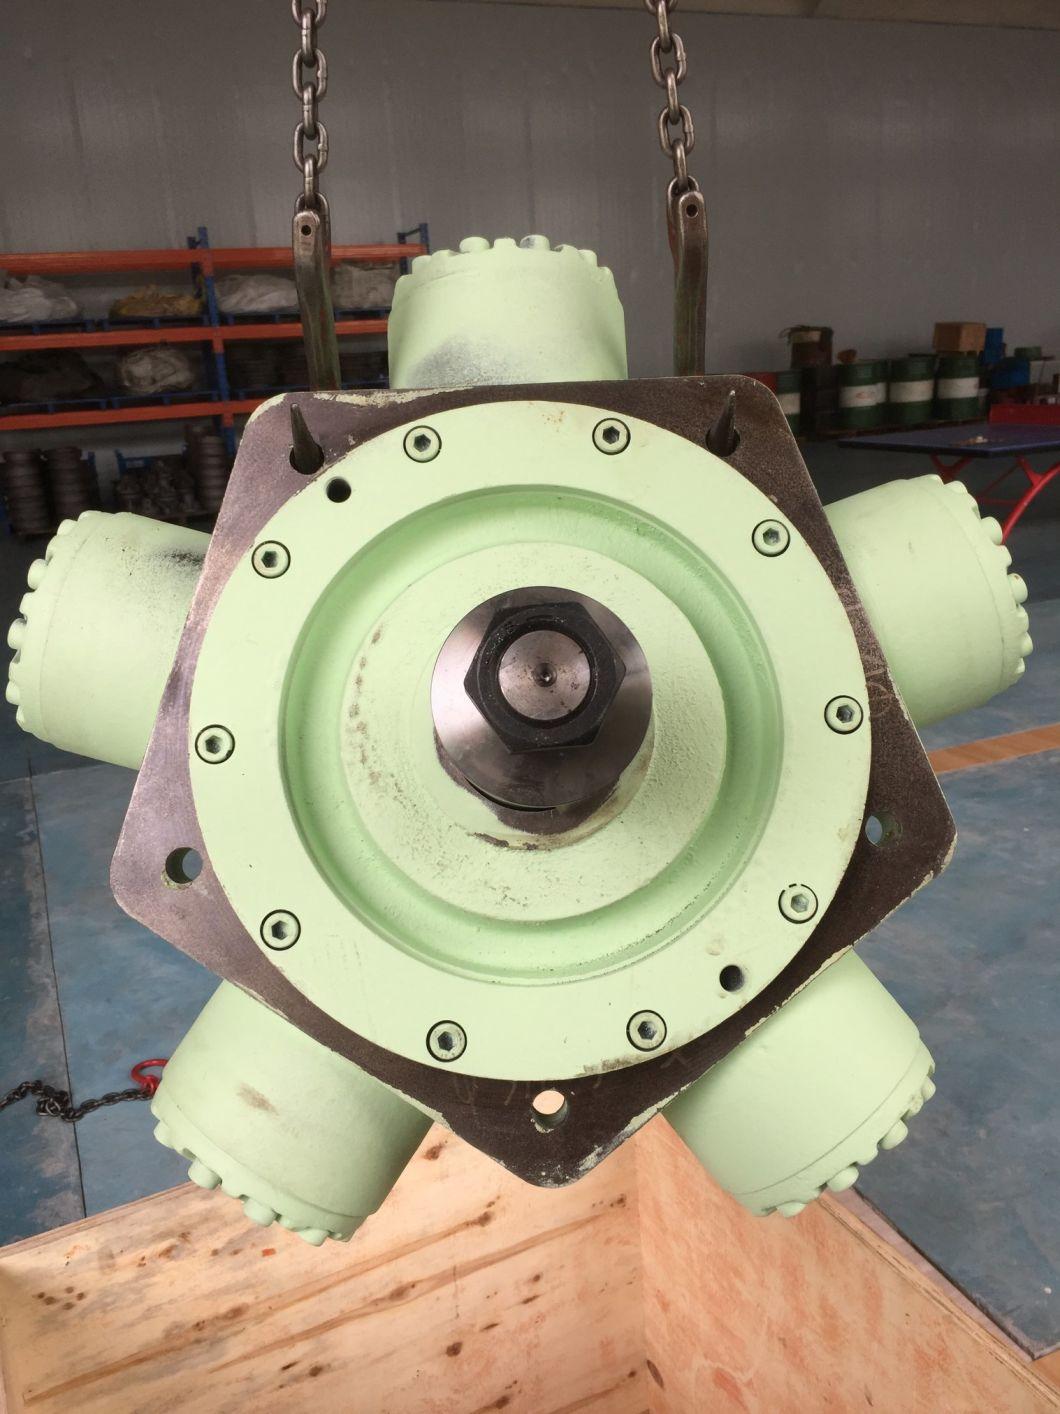 Good Price Kayaba Mrh-1500t Low Speed High Torque Radial Piston Hydraulic Motor for Winch and Injection Moulding Machine.